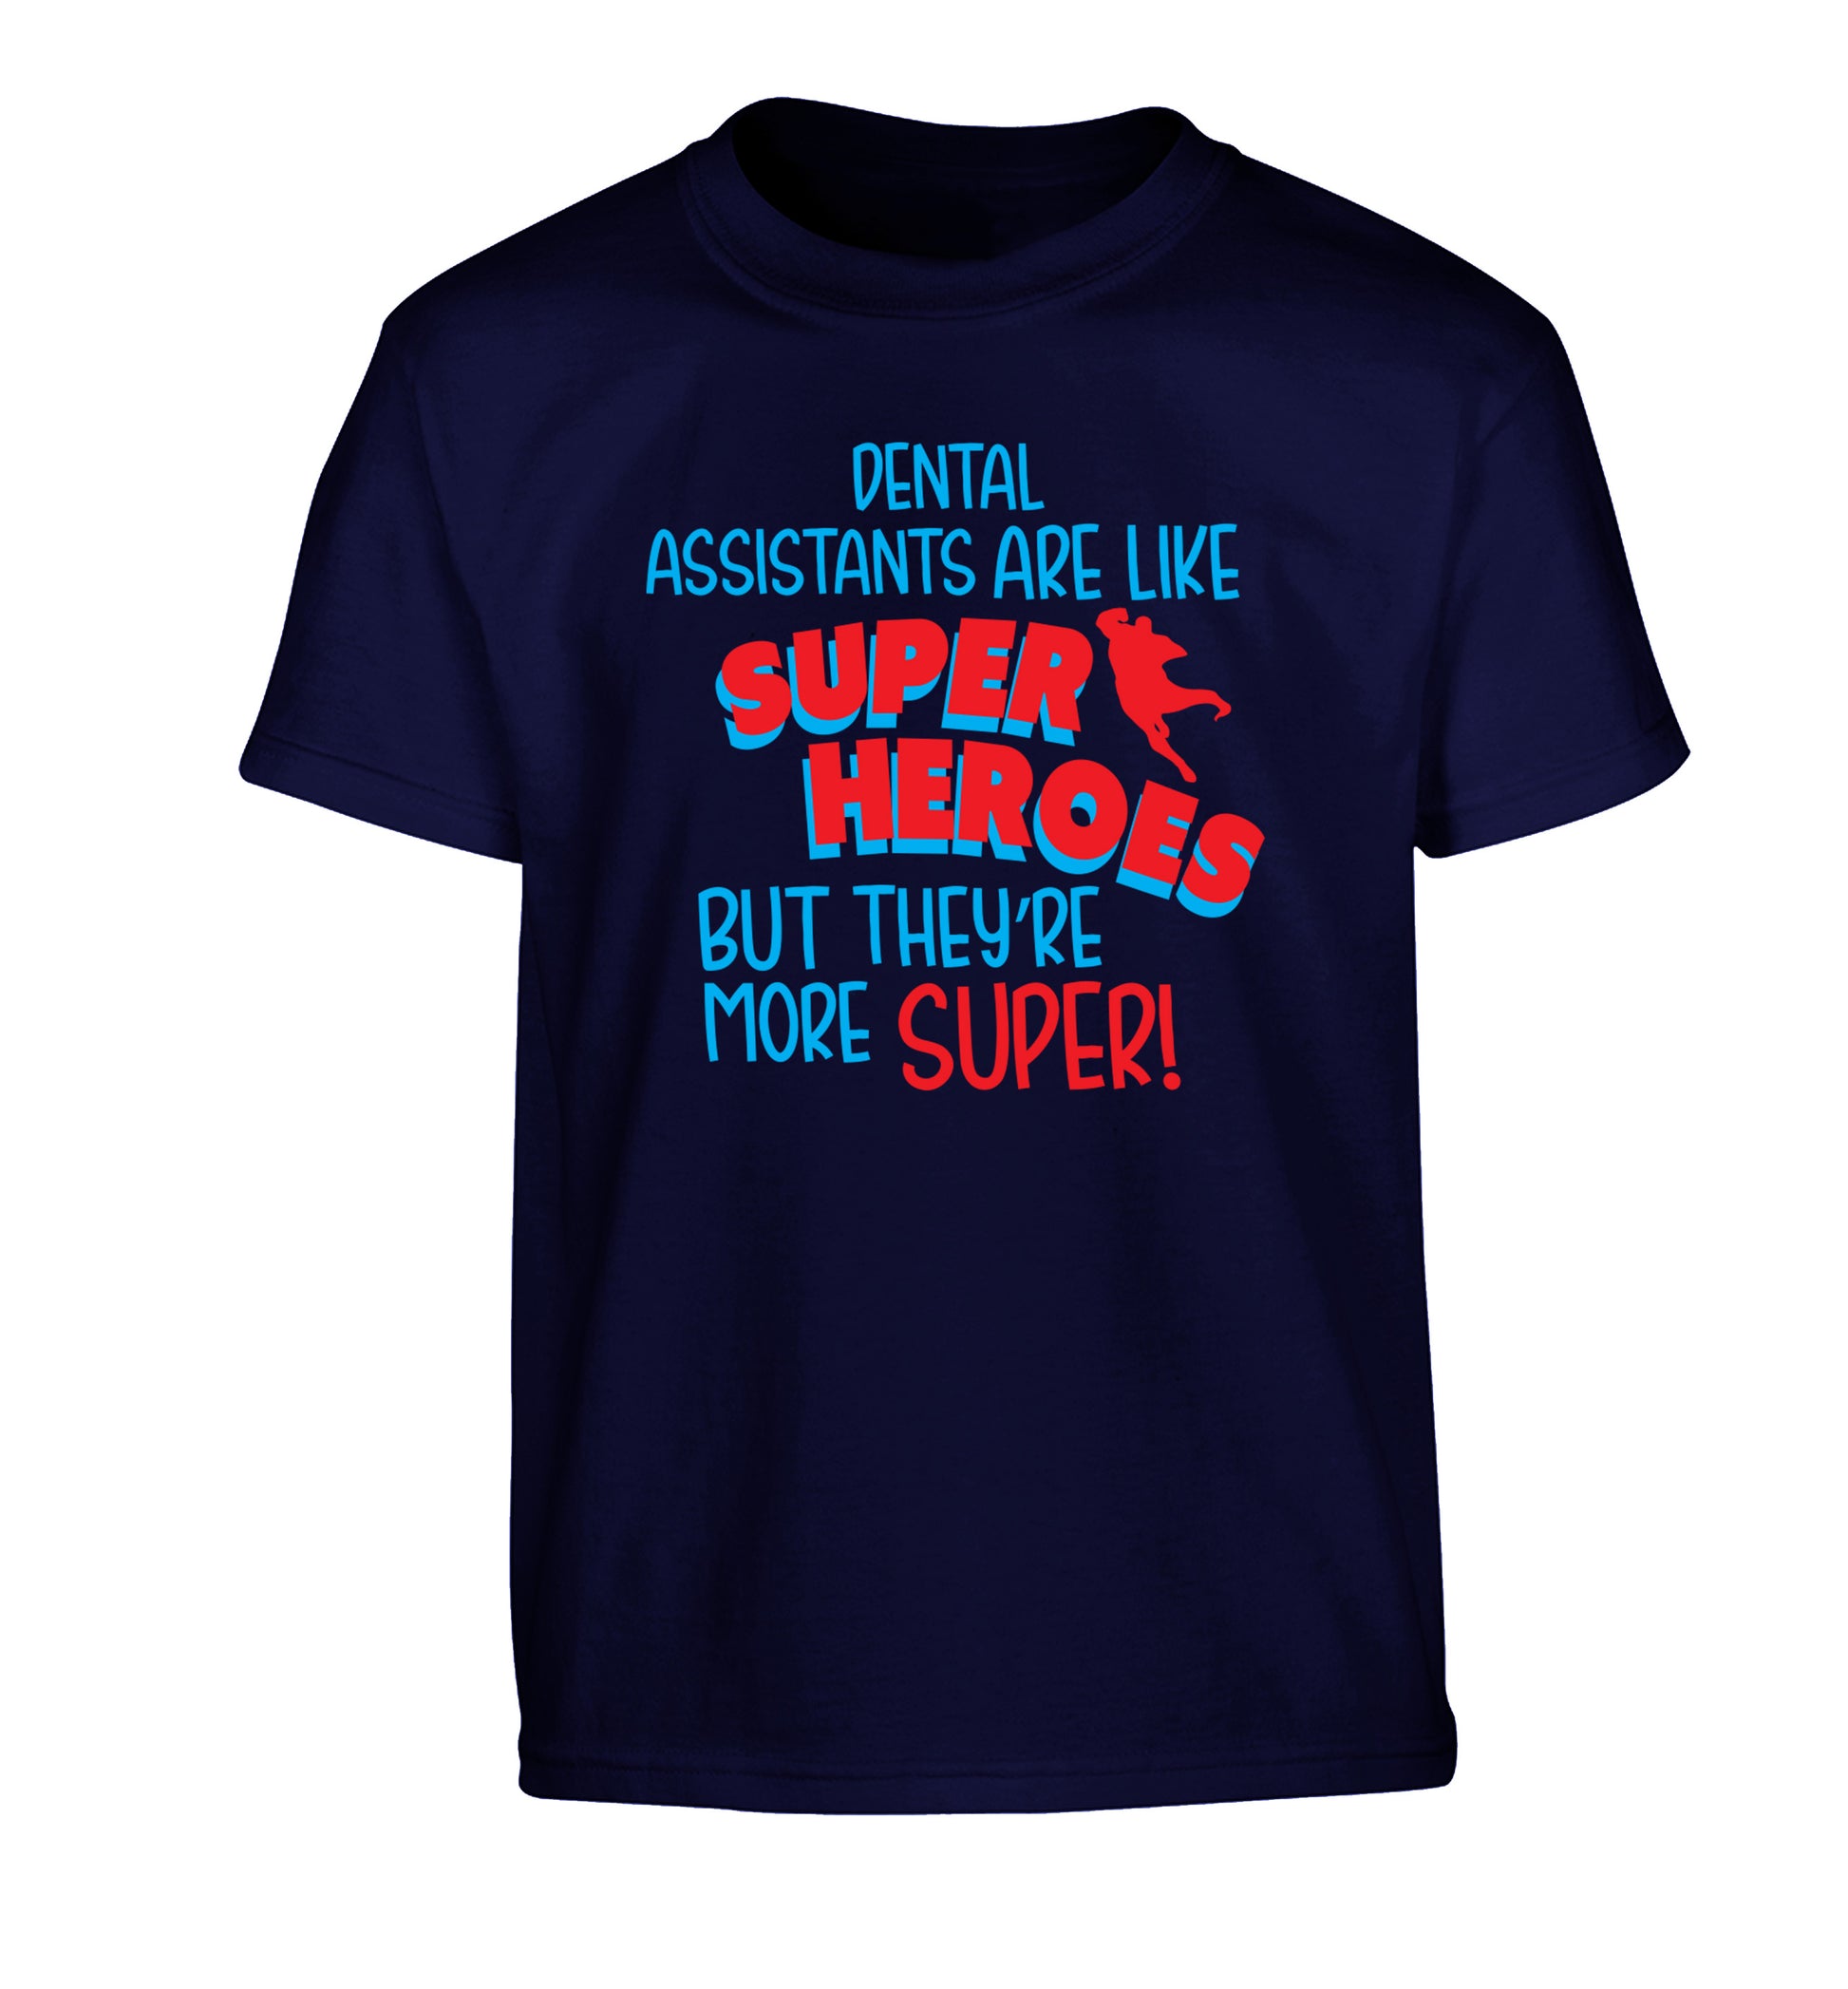 Dental Assistants are like superheros but they're more super Children's navy Tshirt 12-13 Years